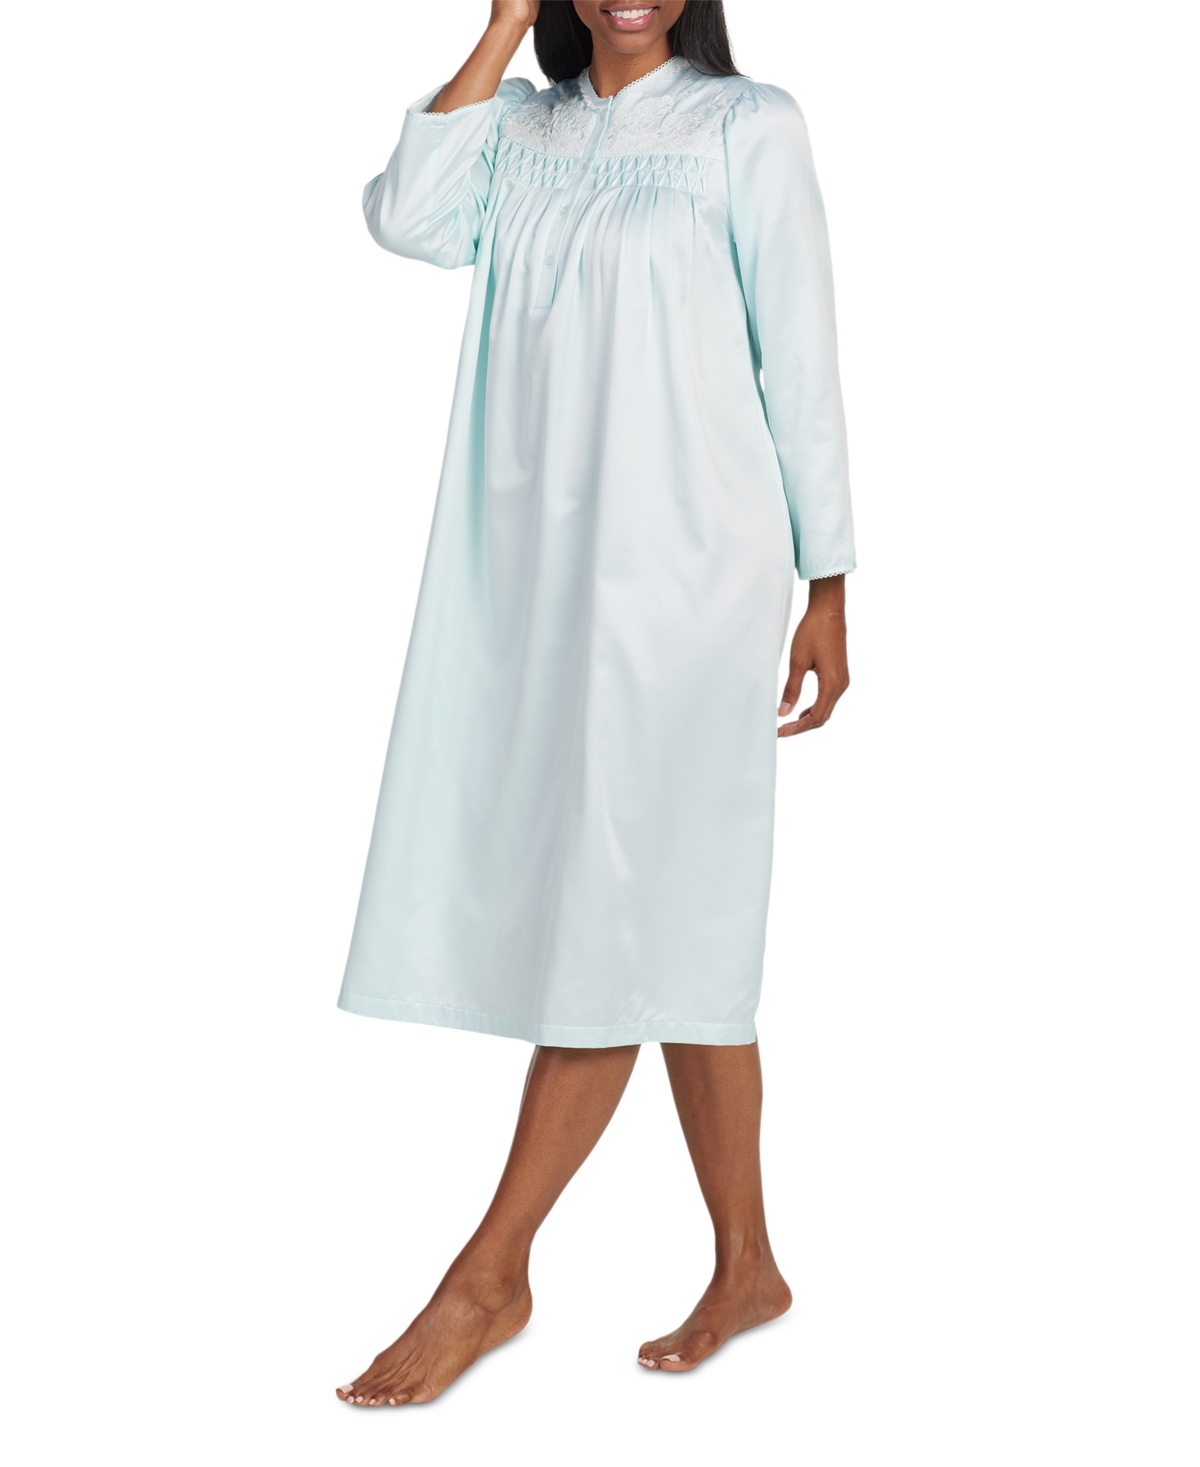 Women's Embroidered Button-Front Nightgown - Turquoise